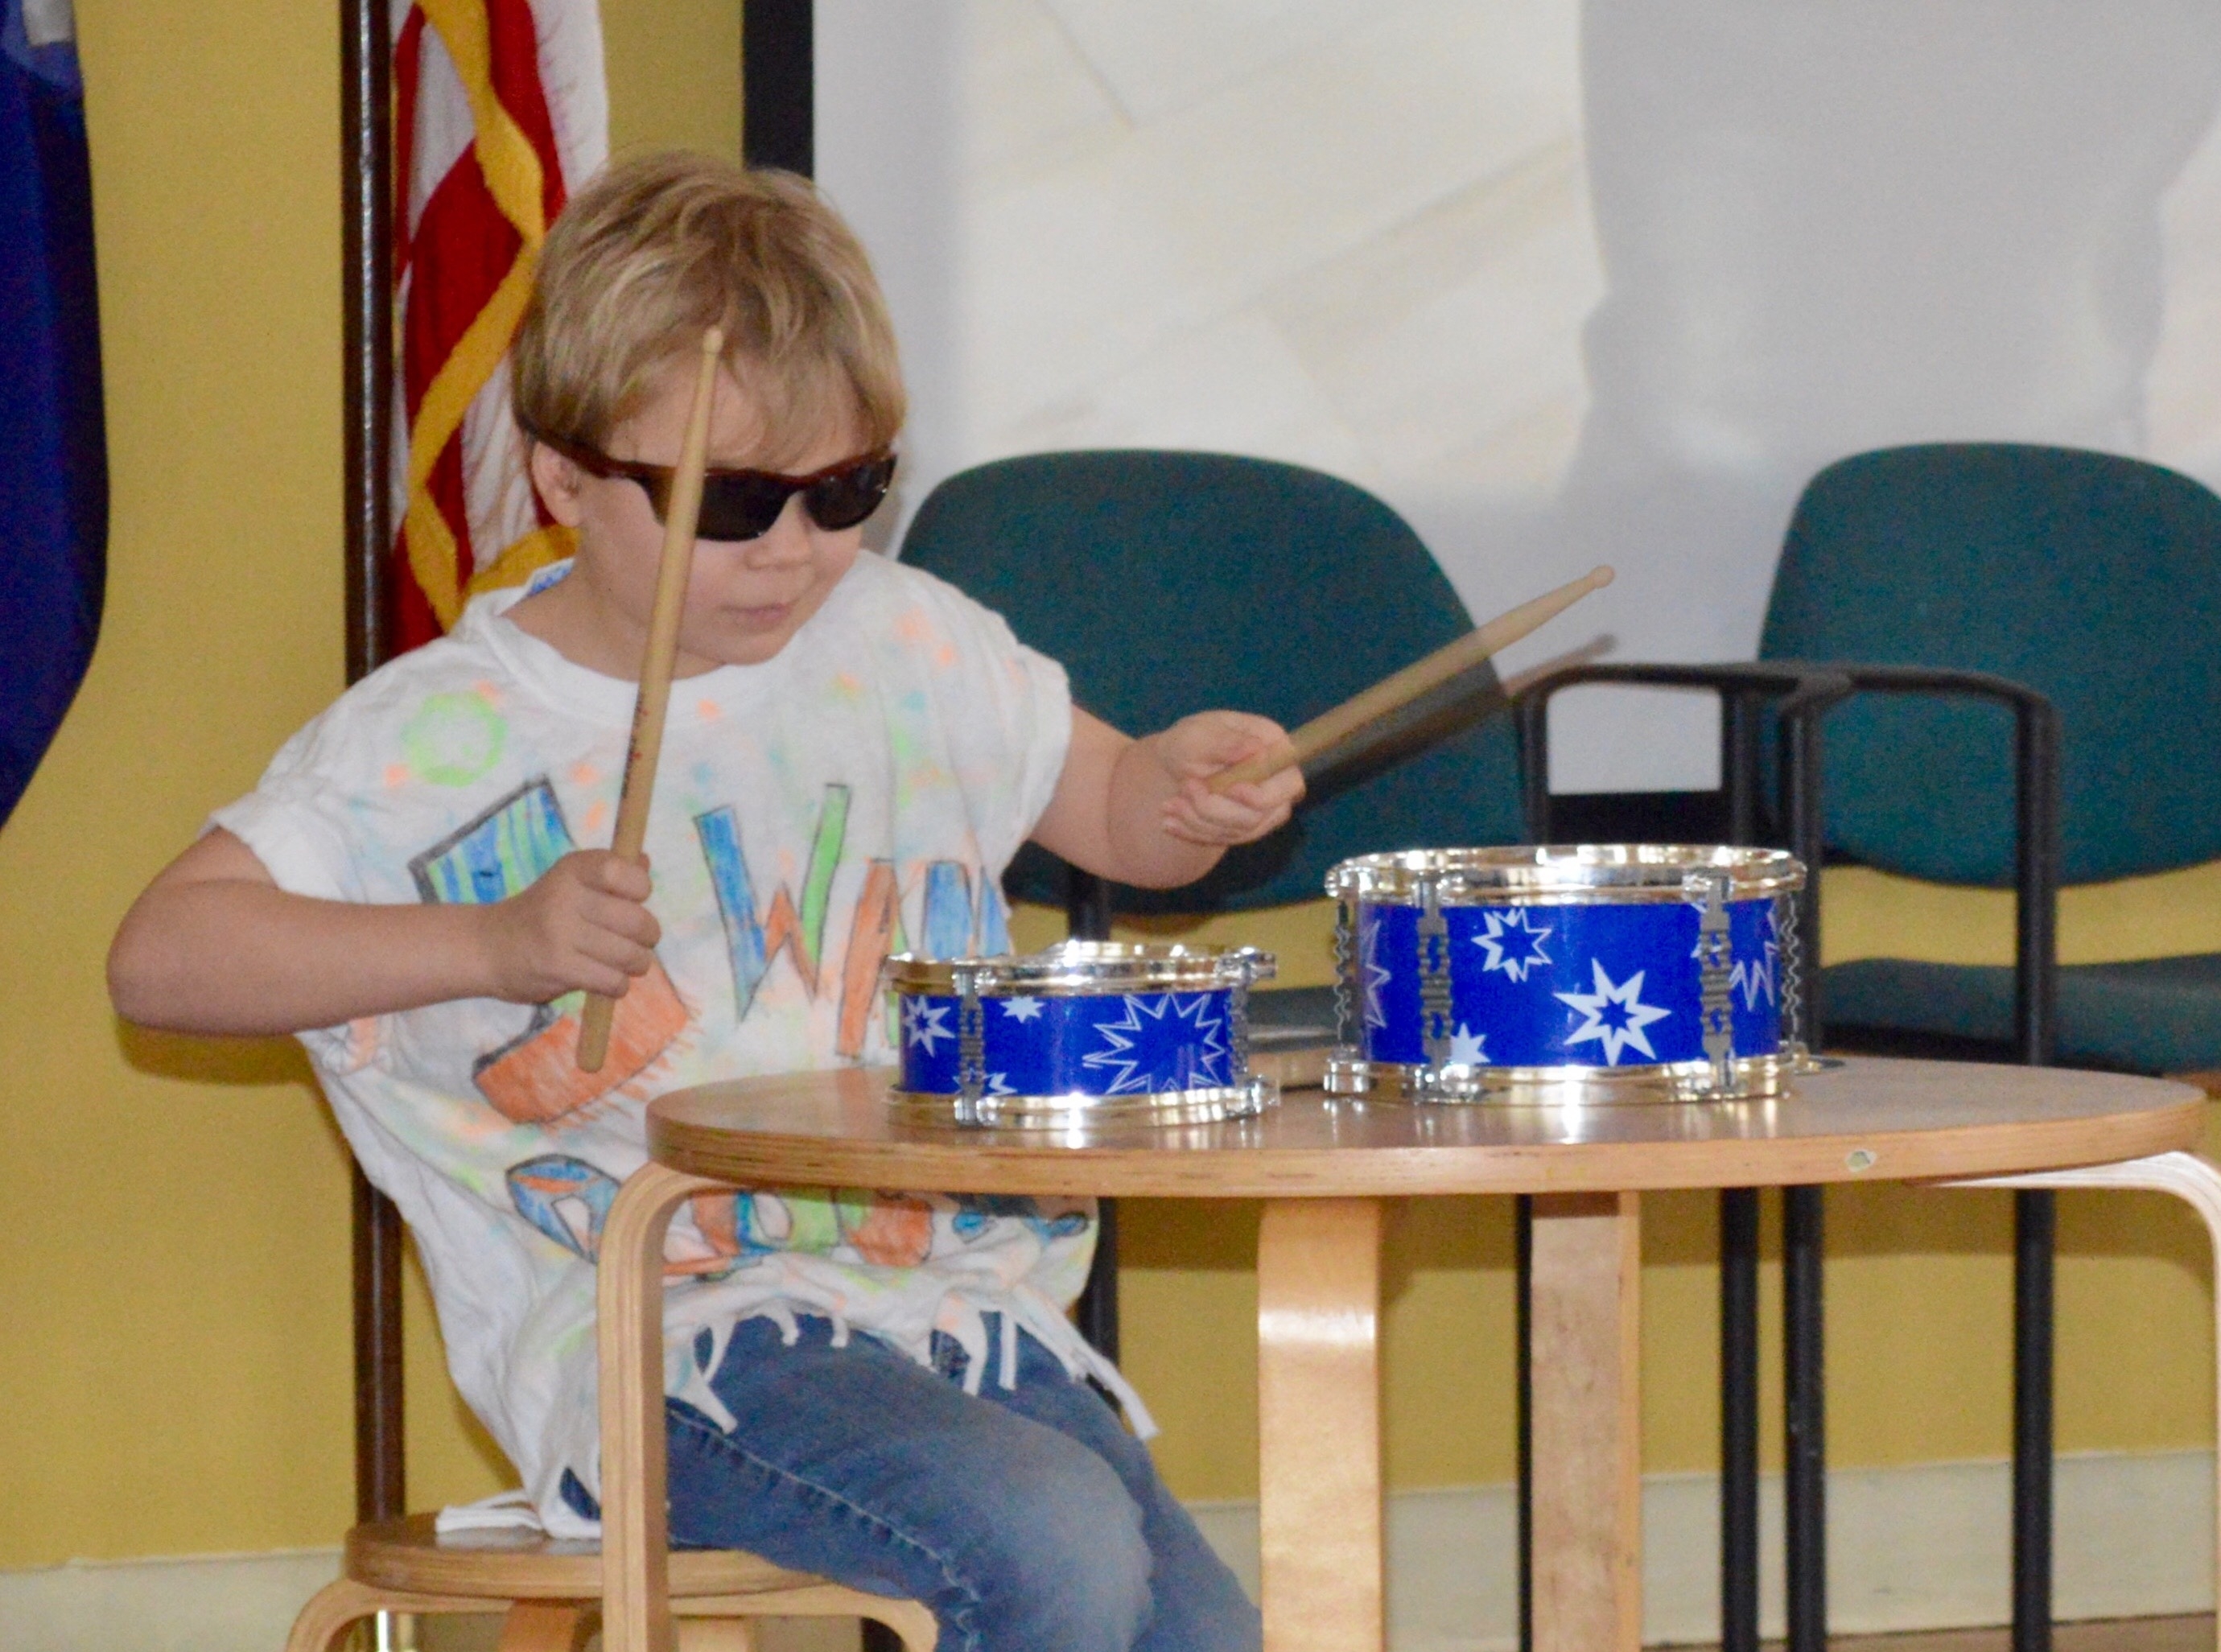 The Talent Show featured a tribute to Led Zeppelin on drums!